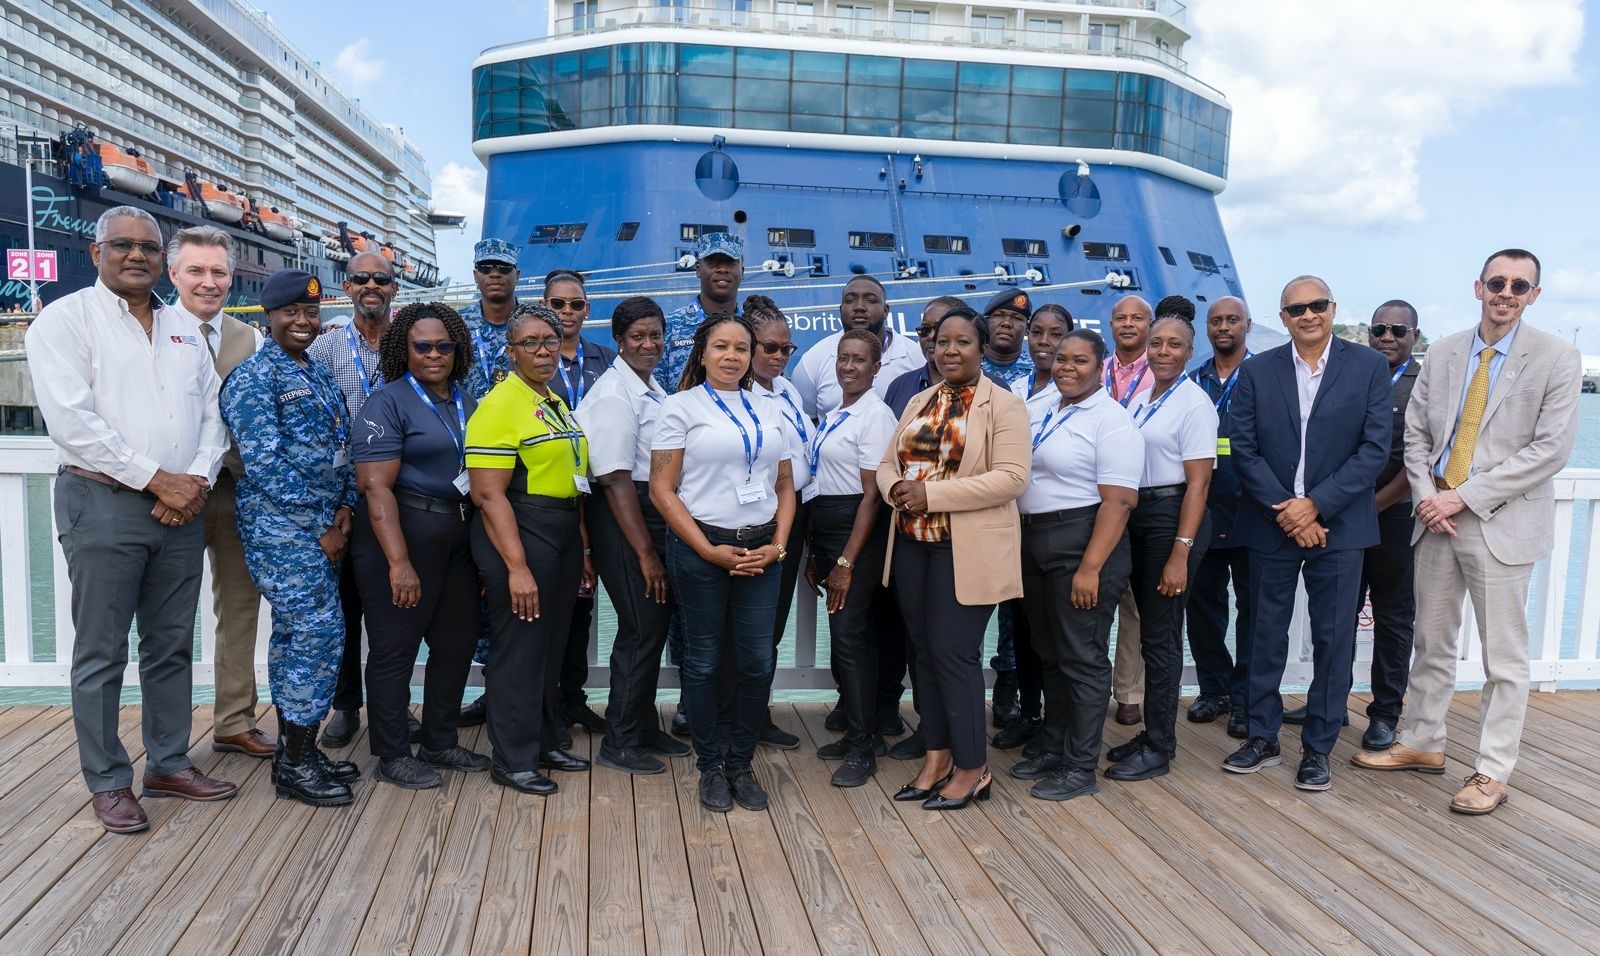 Antigua Cruise Port collaborates with IMO and local government for port security workshop